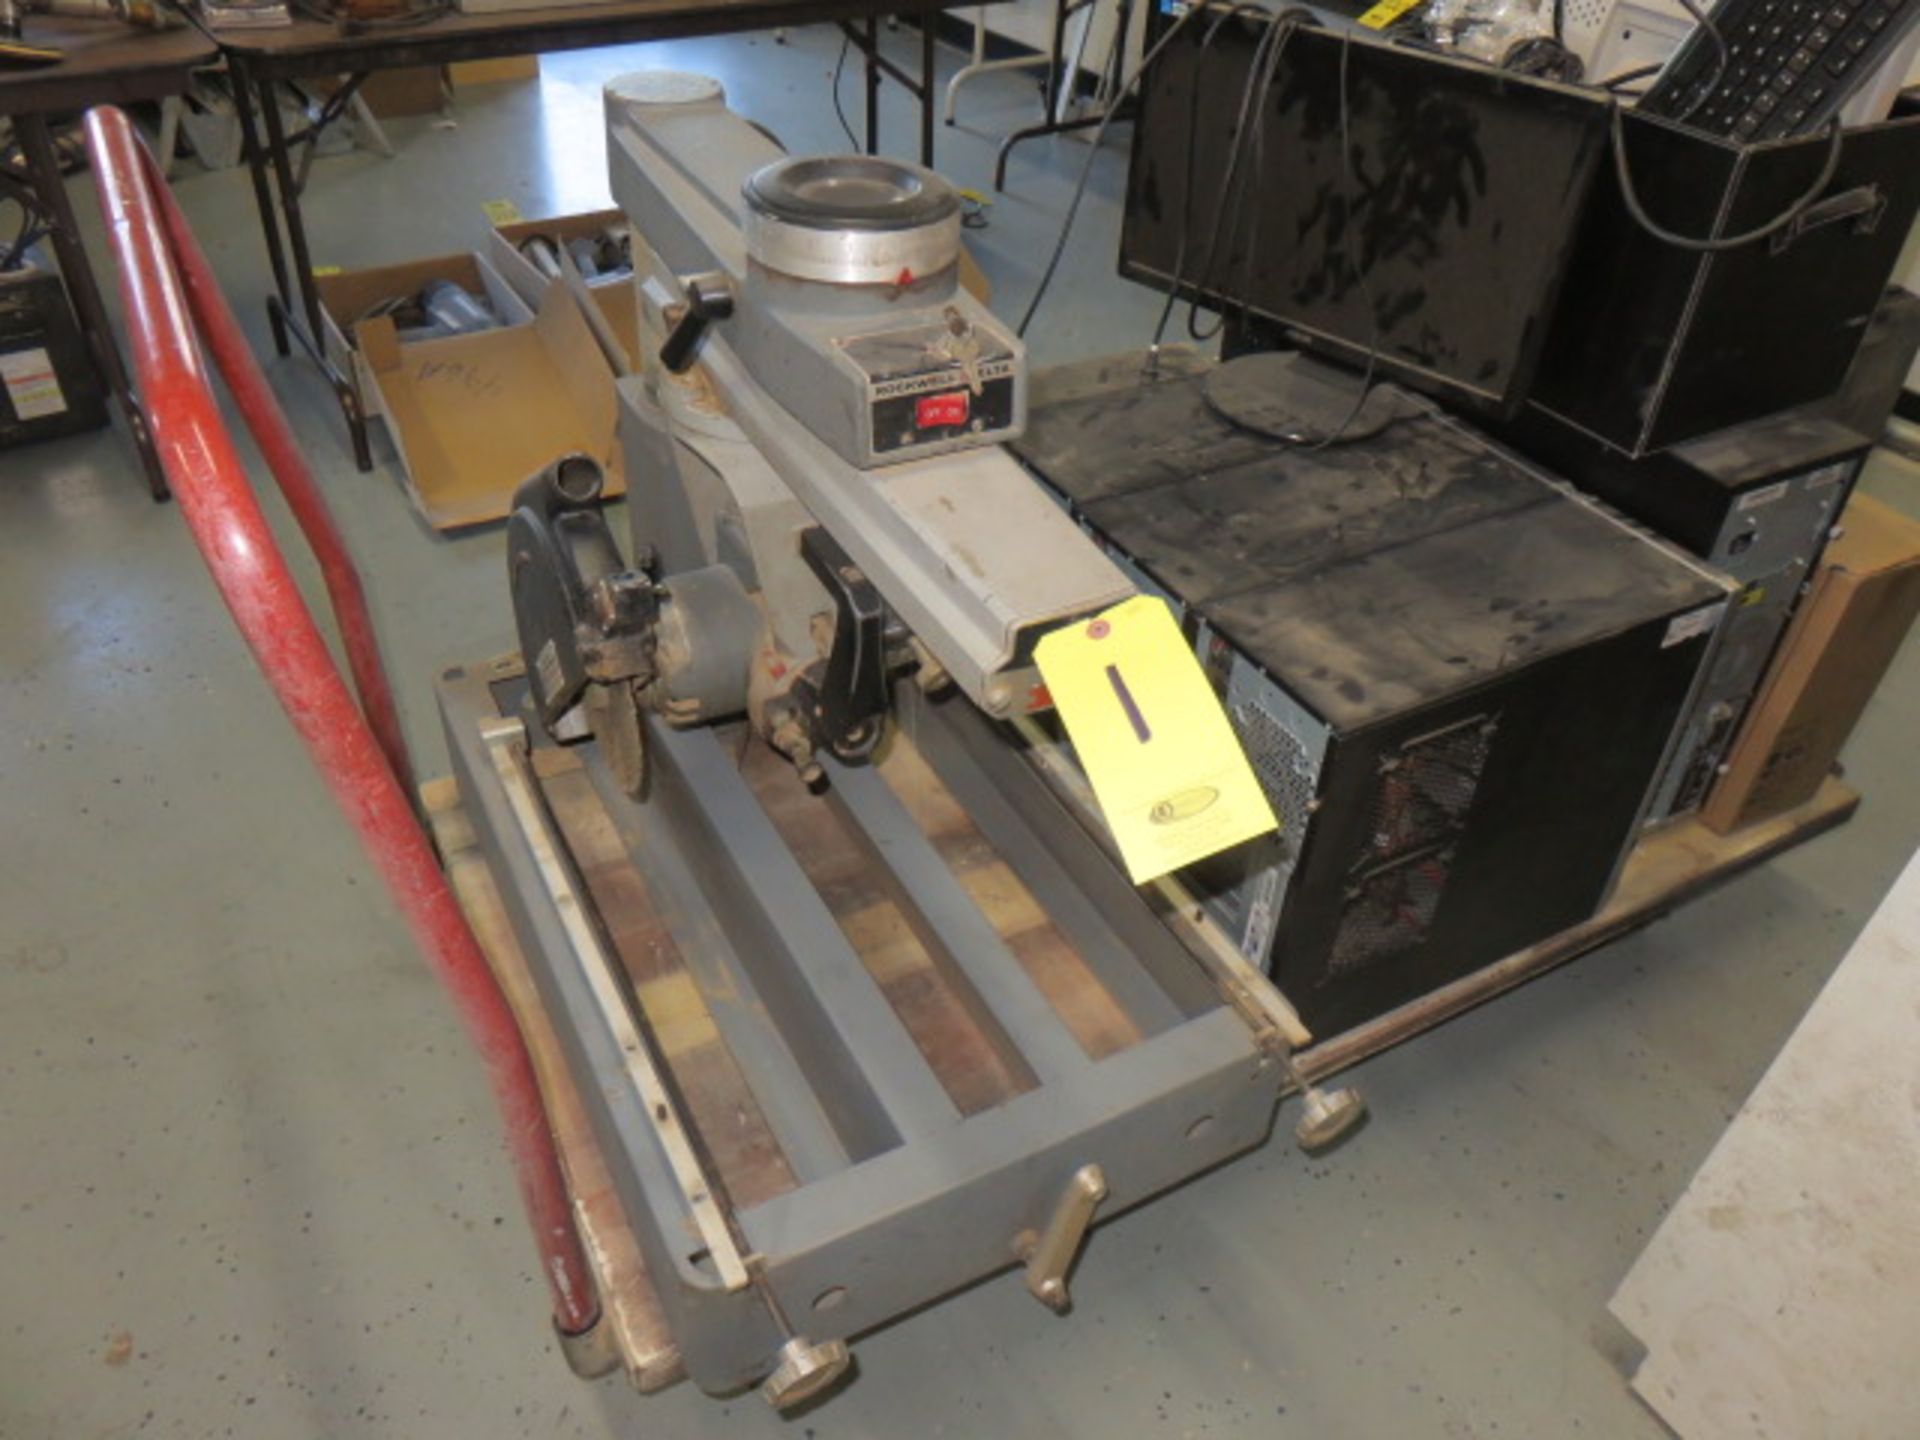 DELTA ROCKWELL 33-694 RADIAL ARM SAW, S/N D01880, 2 HP